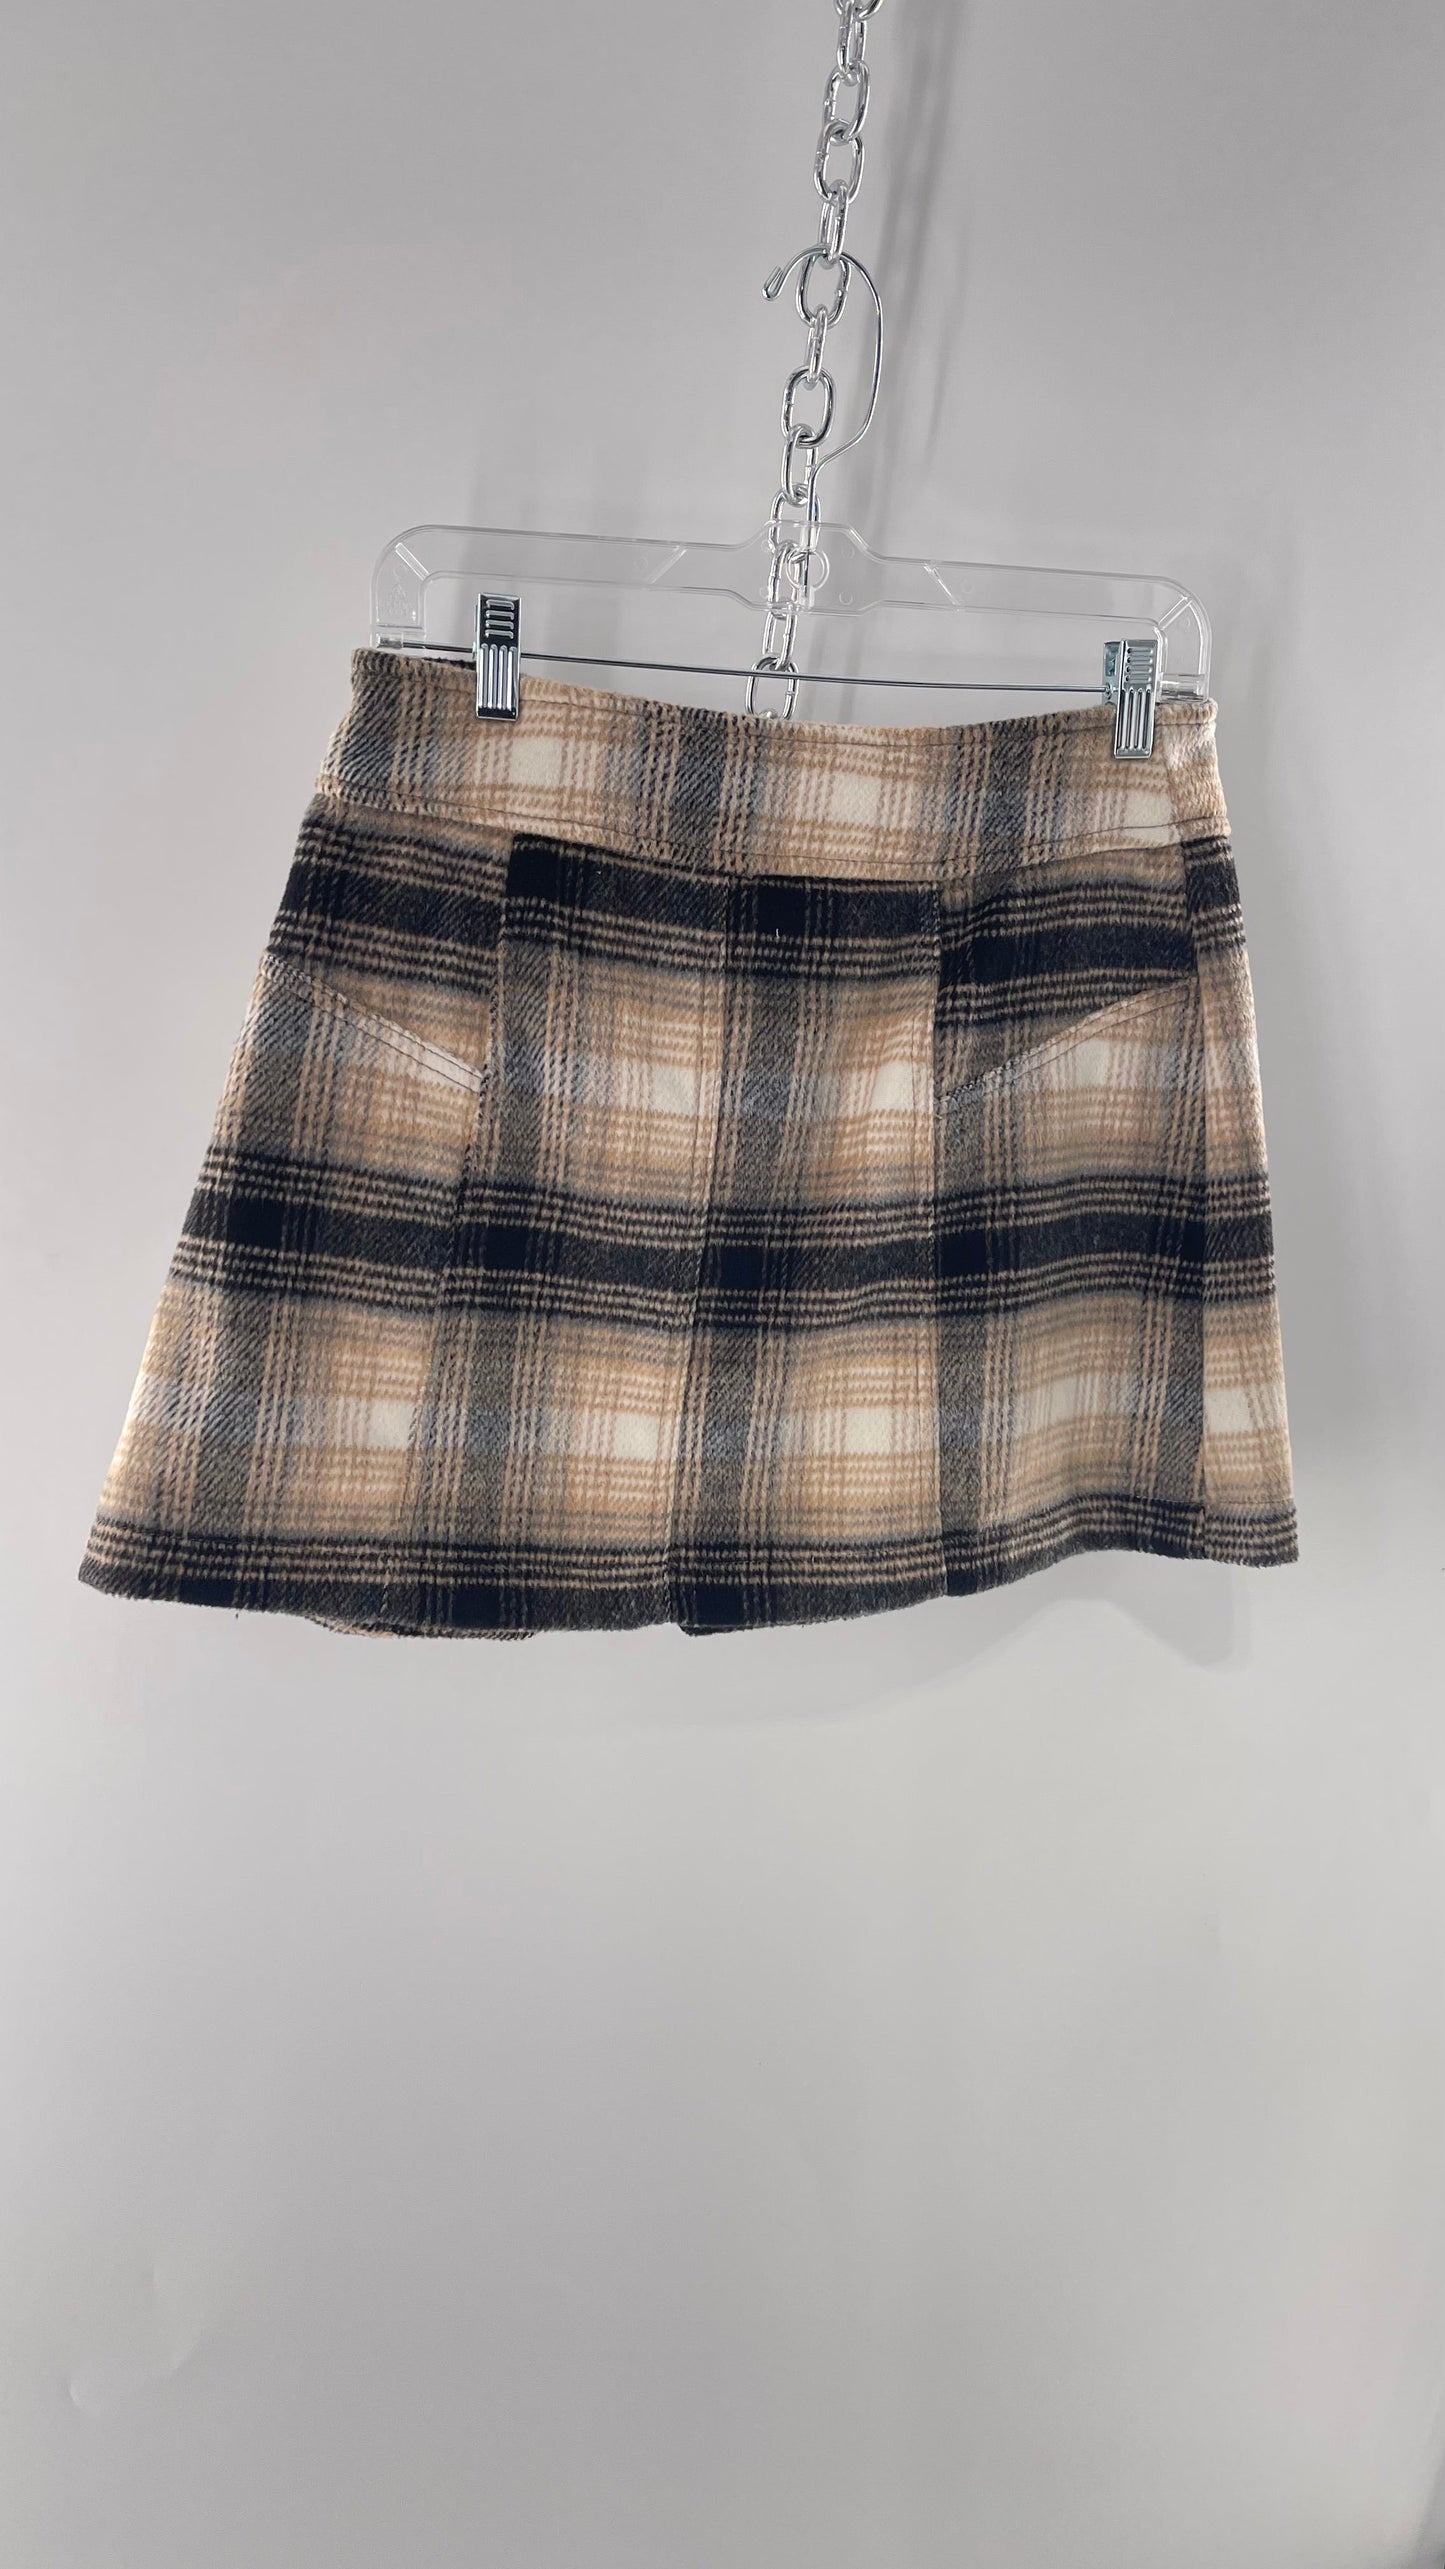 Free People Plaid Beige Gray Soft Mini Skirt with Side Slit and Built in Grommet Belt (4)